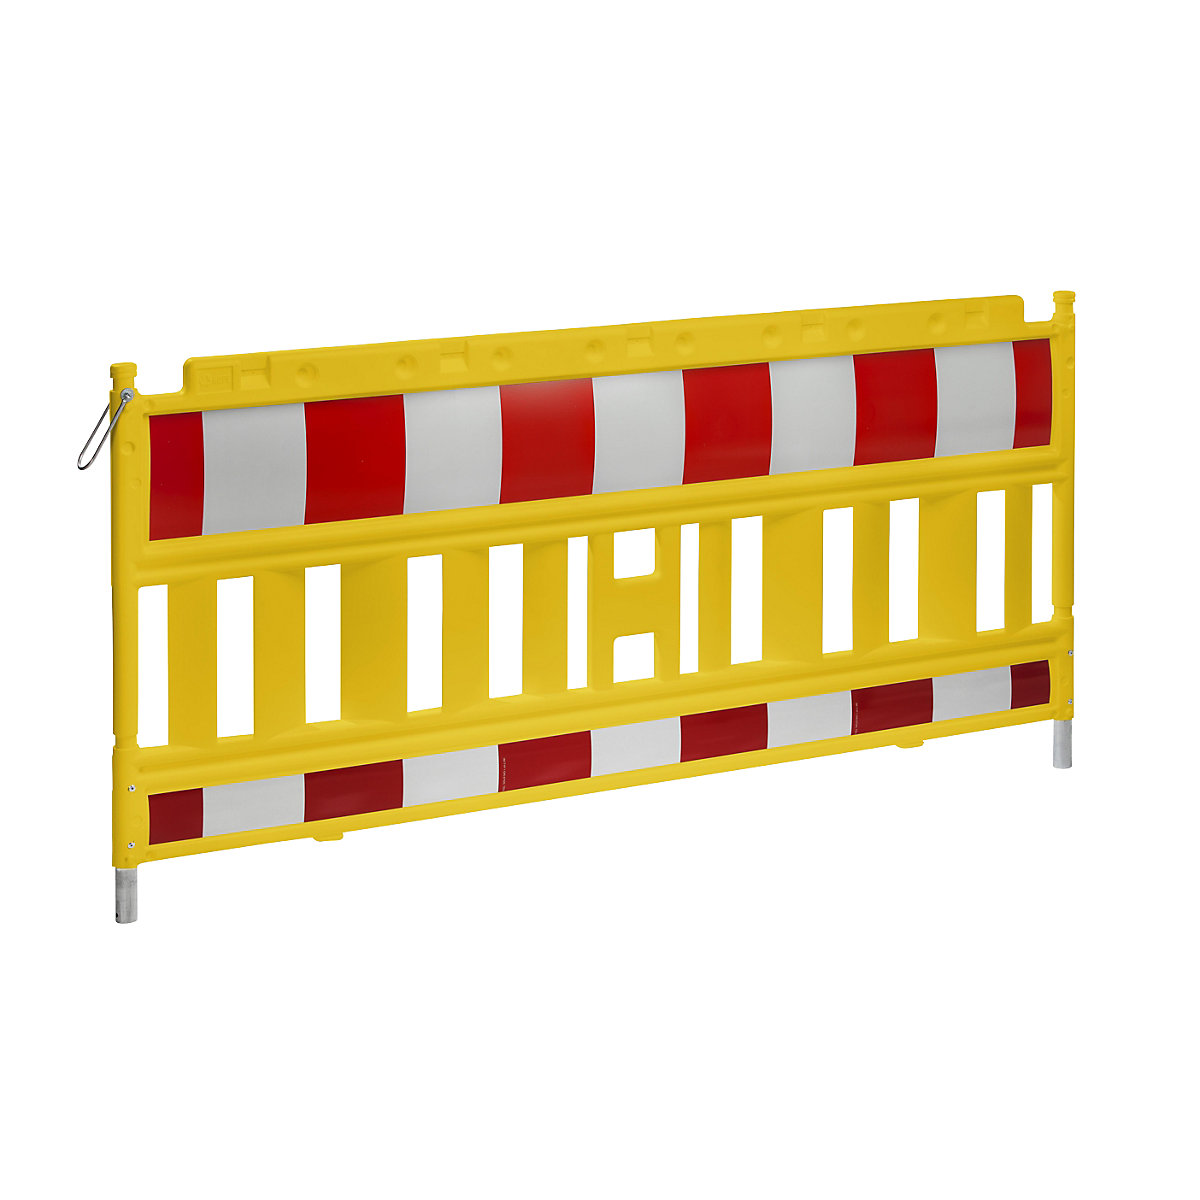 Plastic barrier fencing with reflective film – Schake